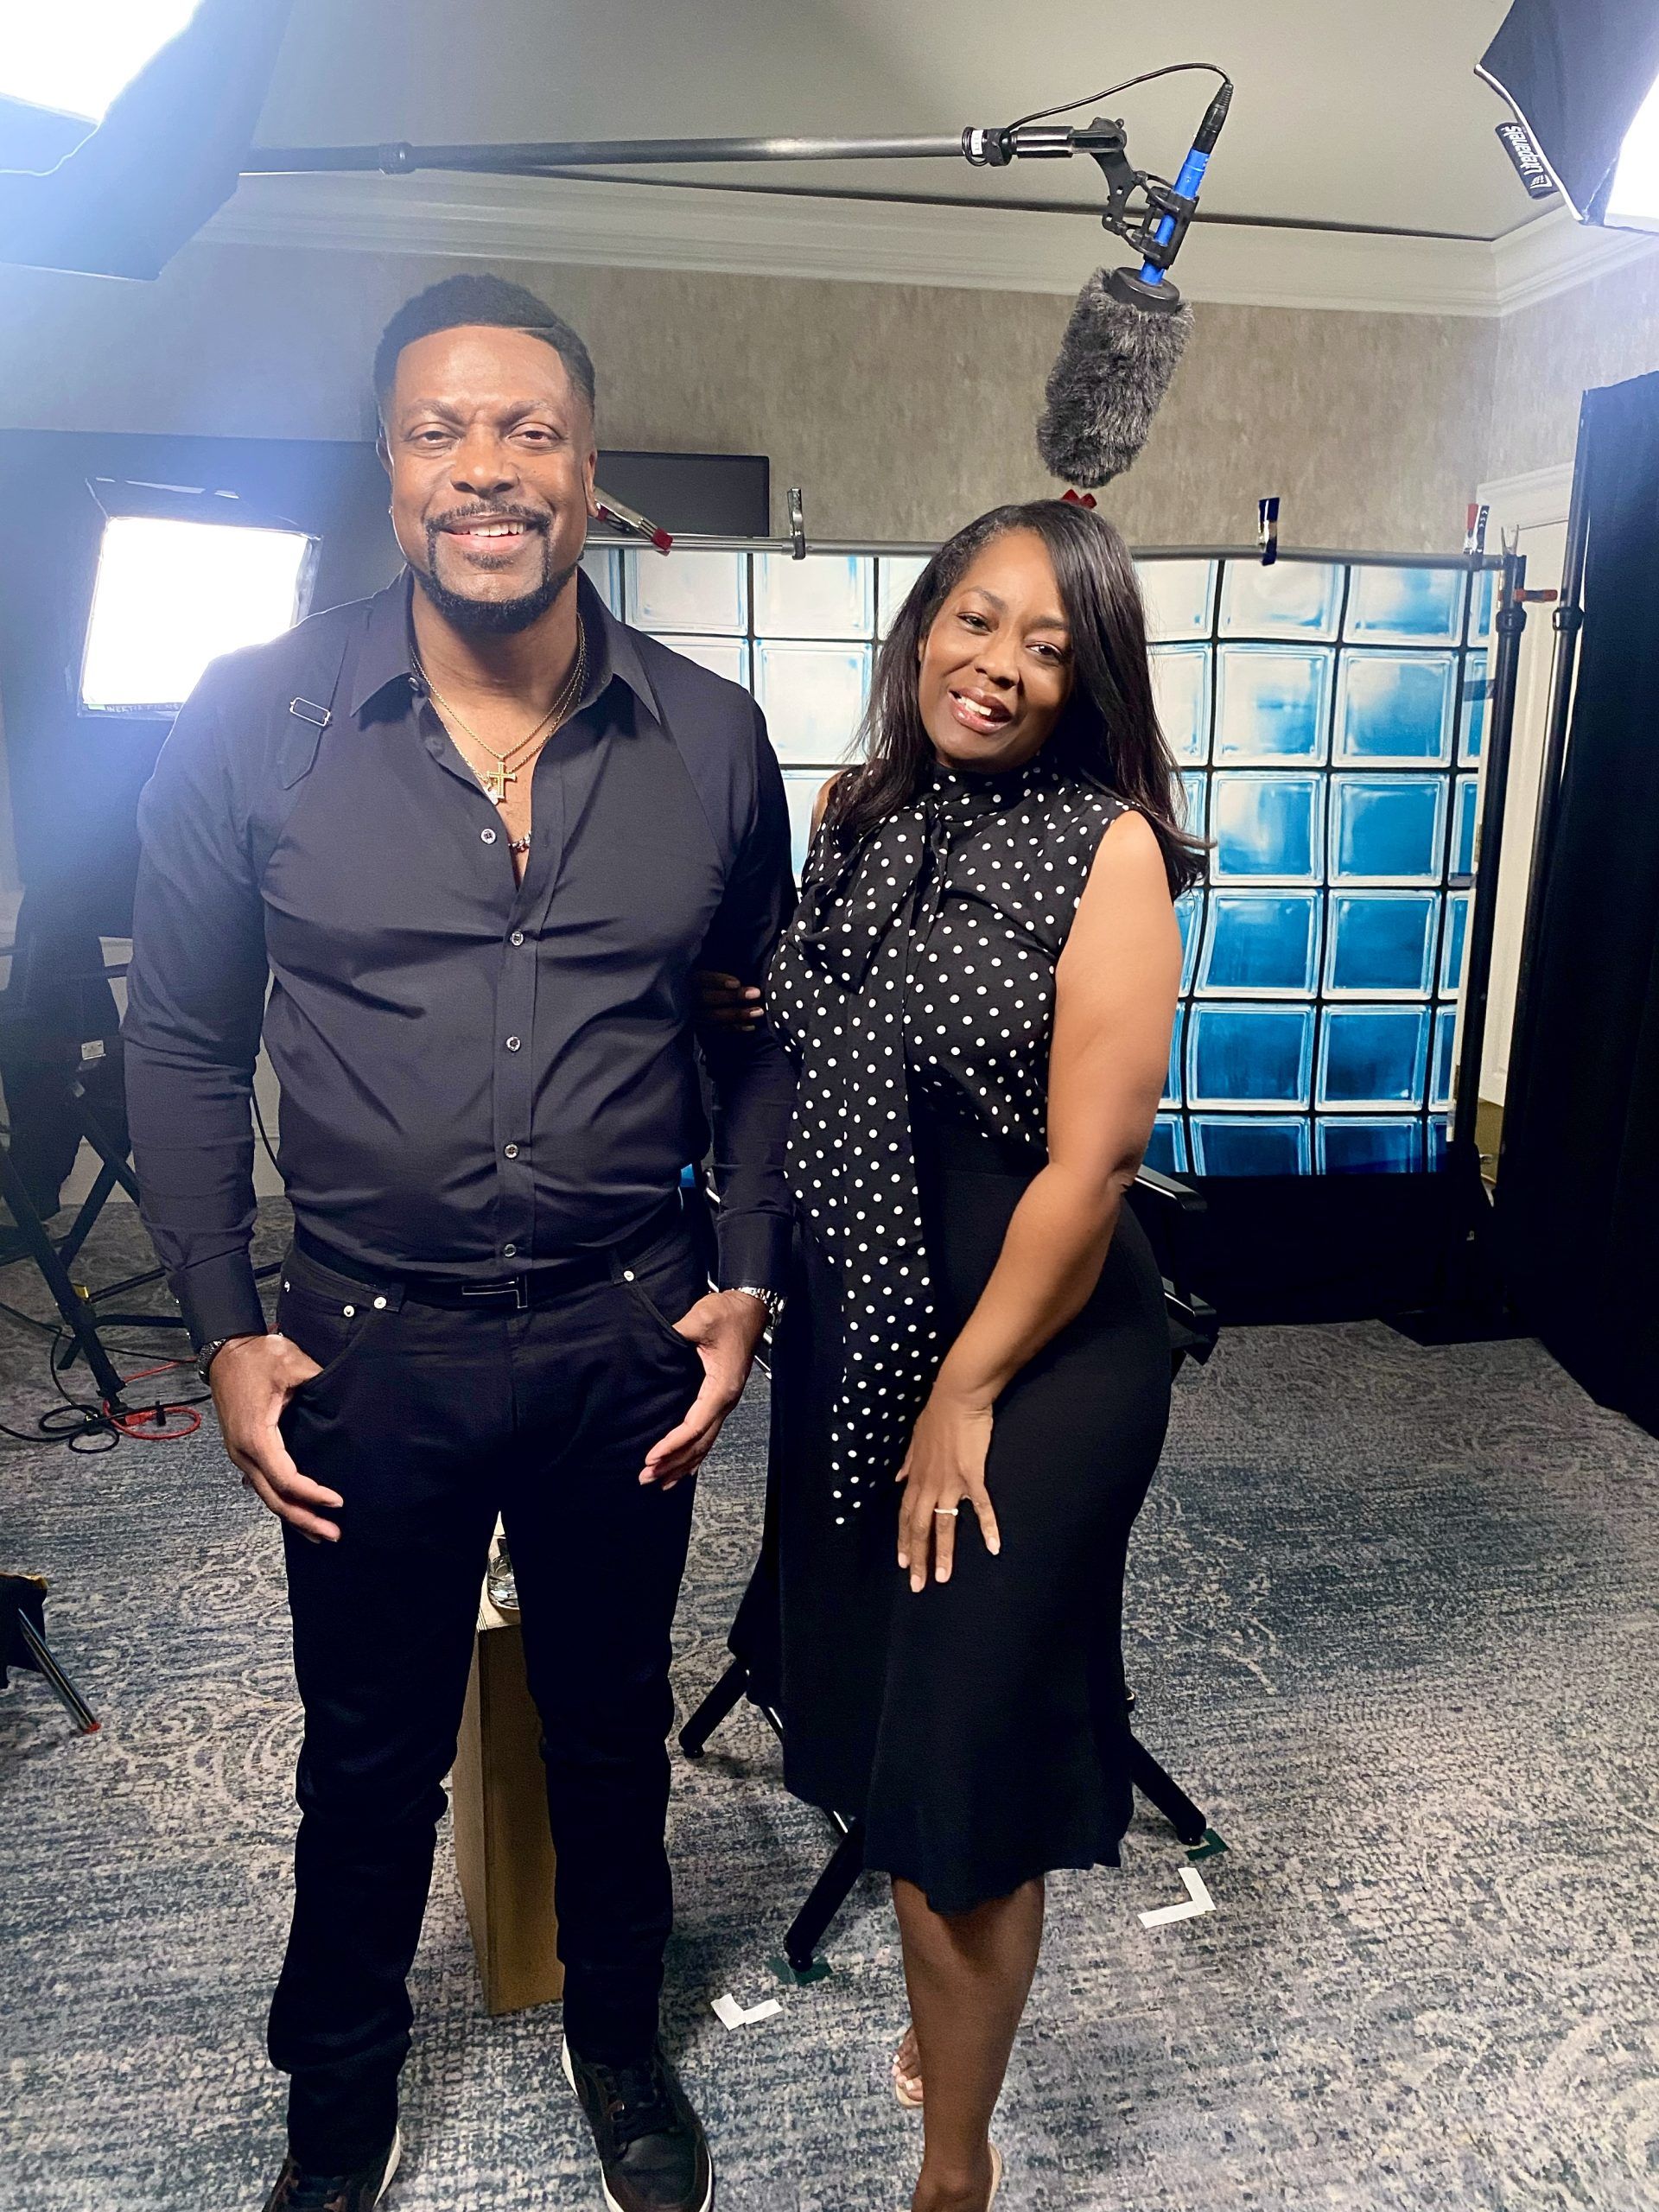 One On One With Actor/Comedian Chris Tucker On His New Film ‘Air’